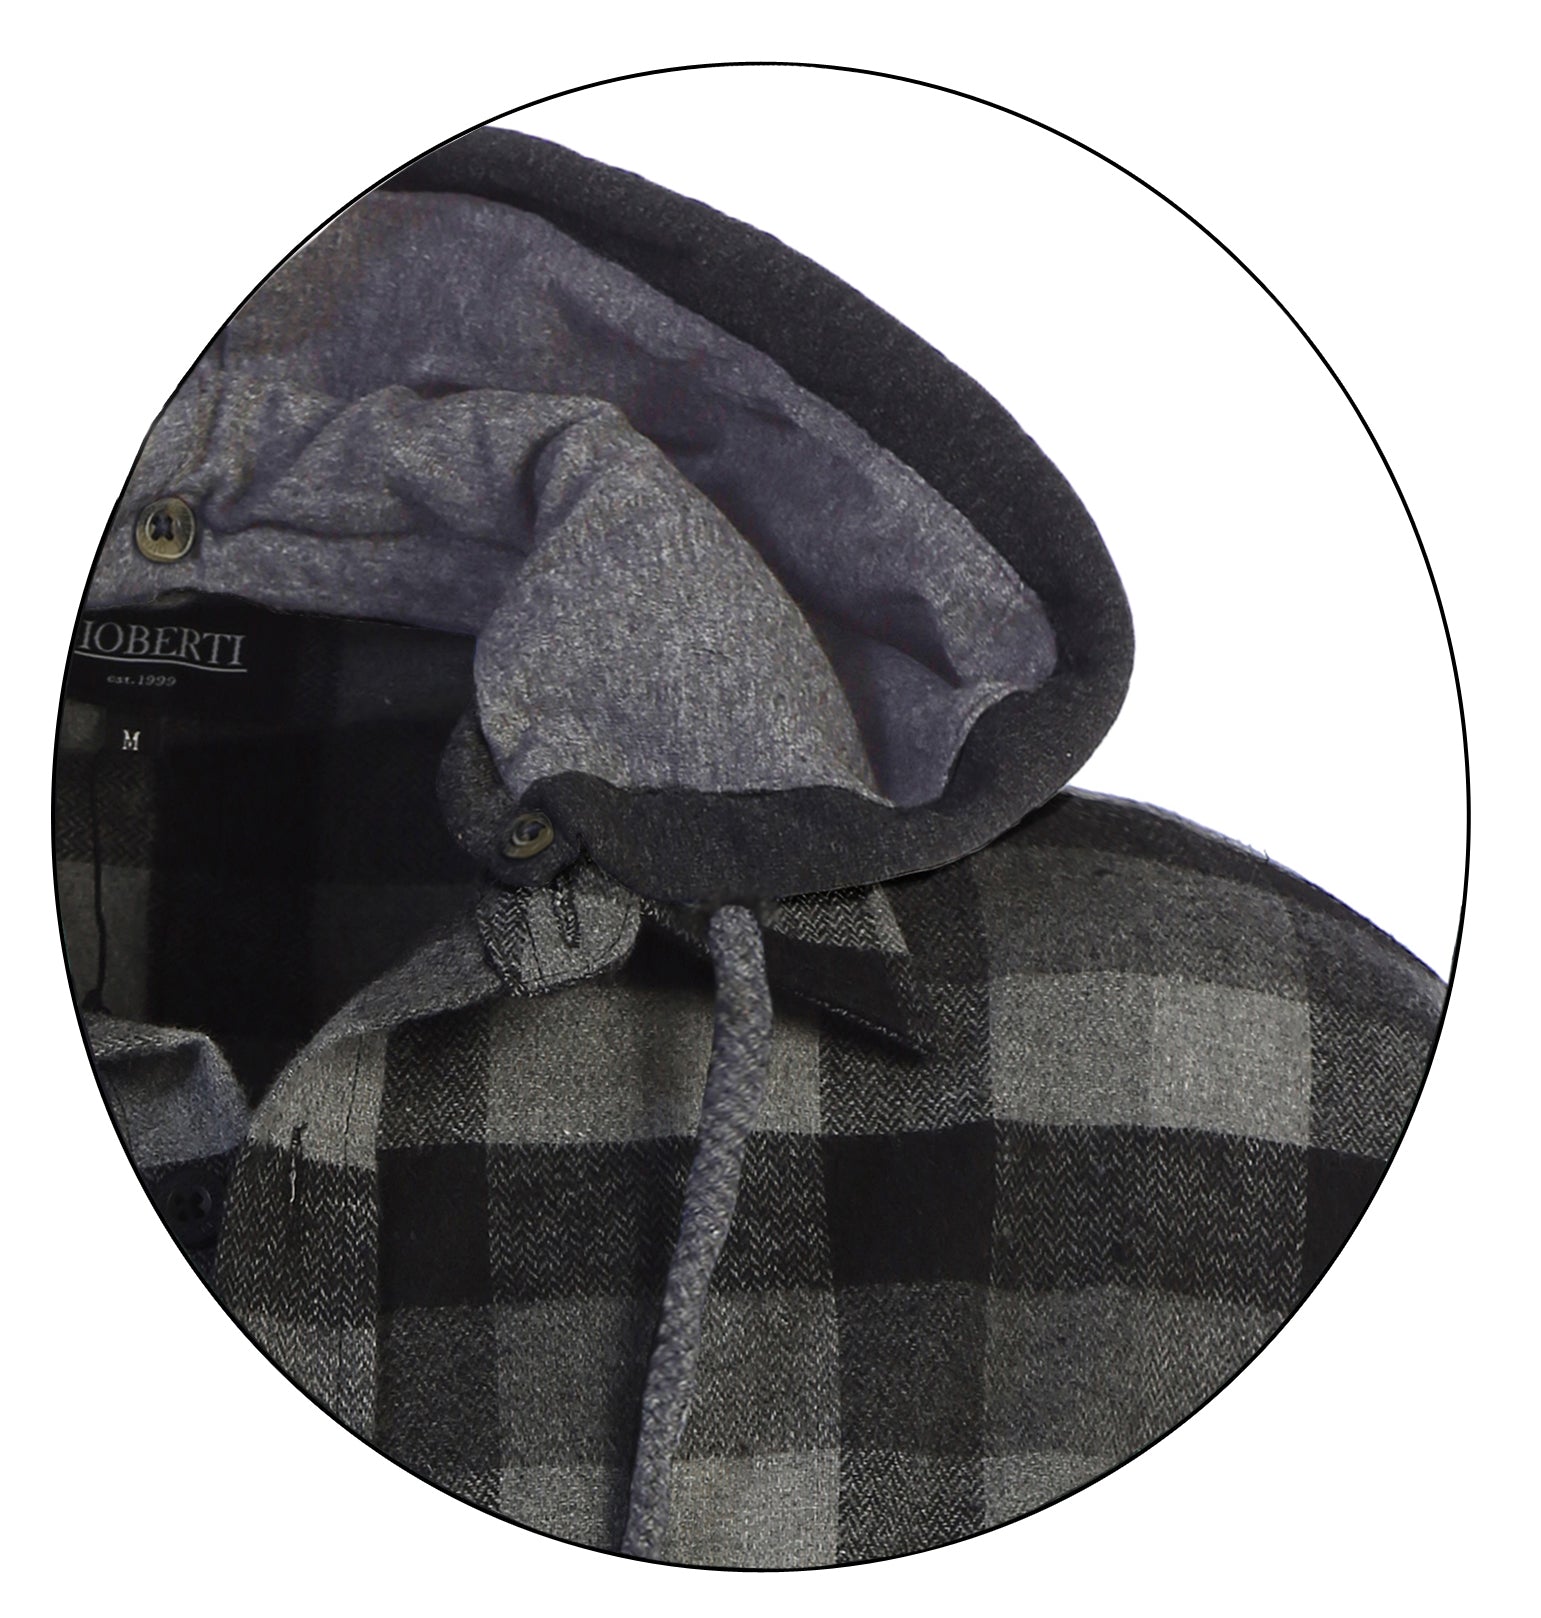 title:Gioberti Men's Black / Charcoal / Gray Removable Hoodie Plaid Checkered Flannel Button Down Shirt;color:Black / Charcoal / Gray